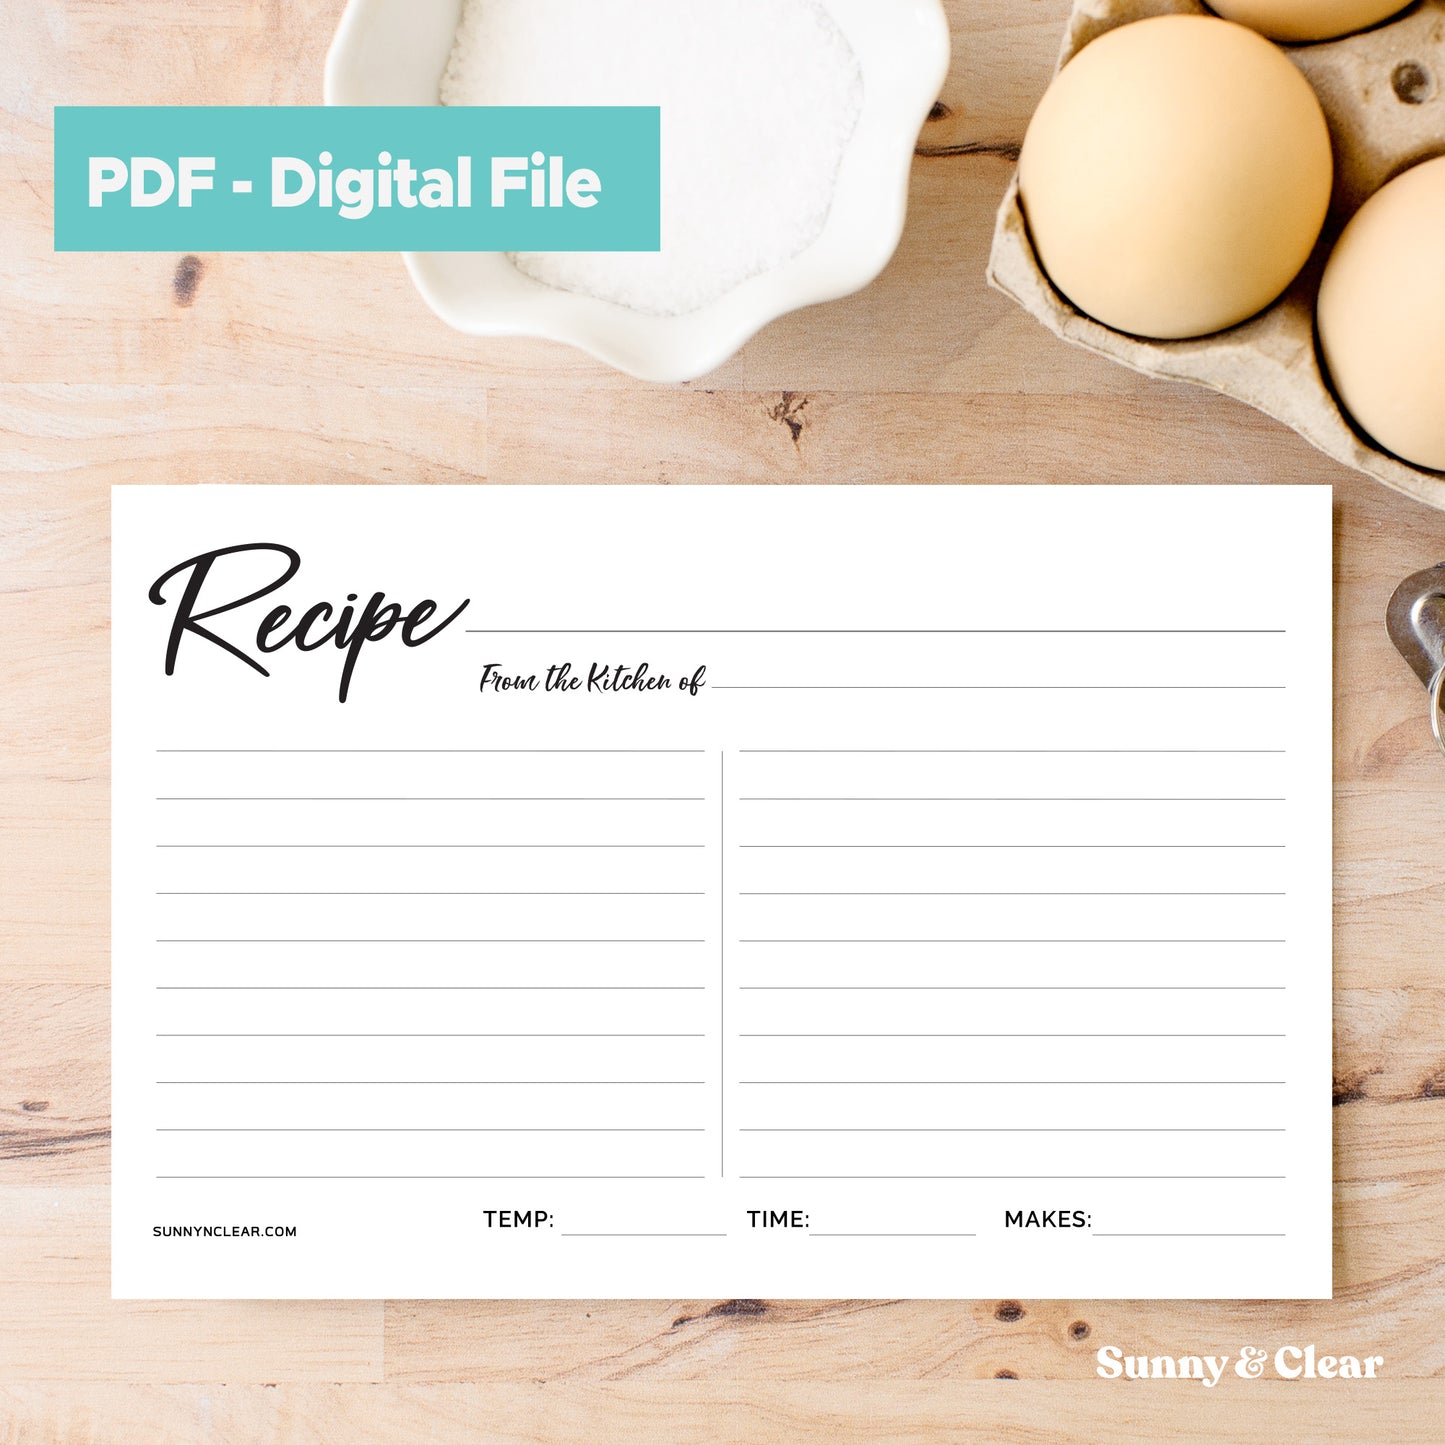 PDF 4x6 Recipe Card Printable, Template, Minimal, Fits our Binders